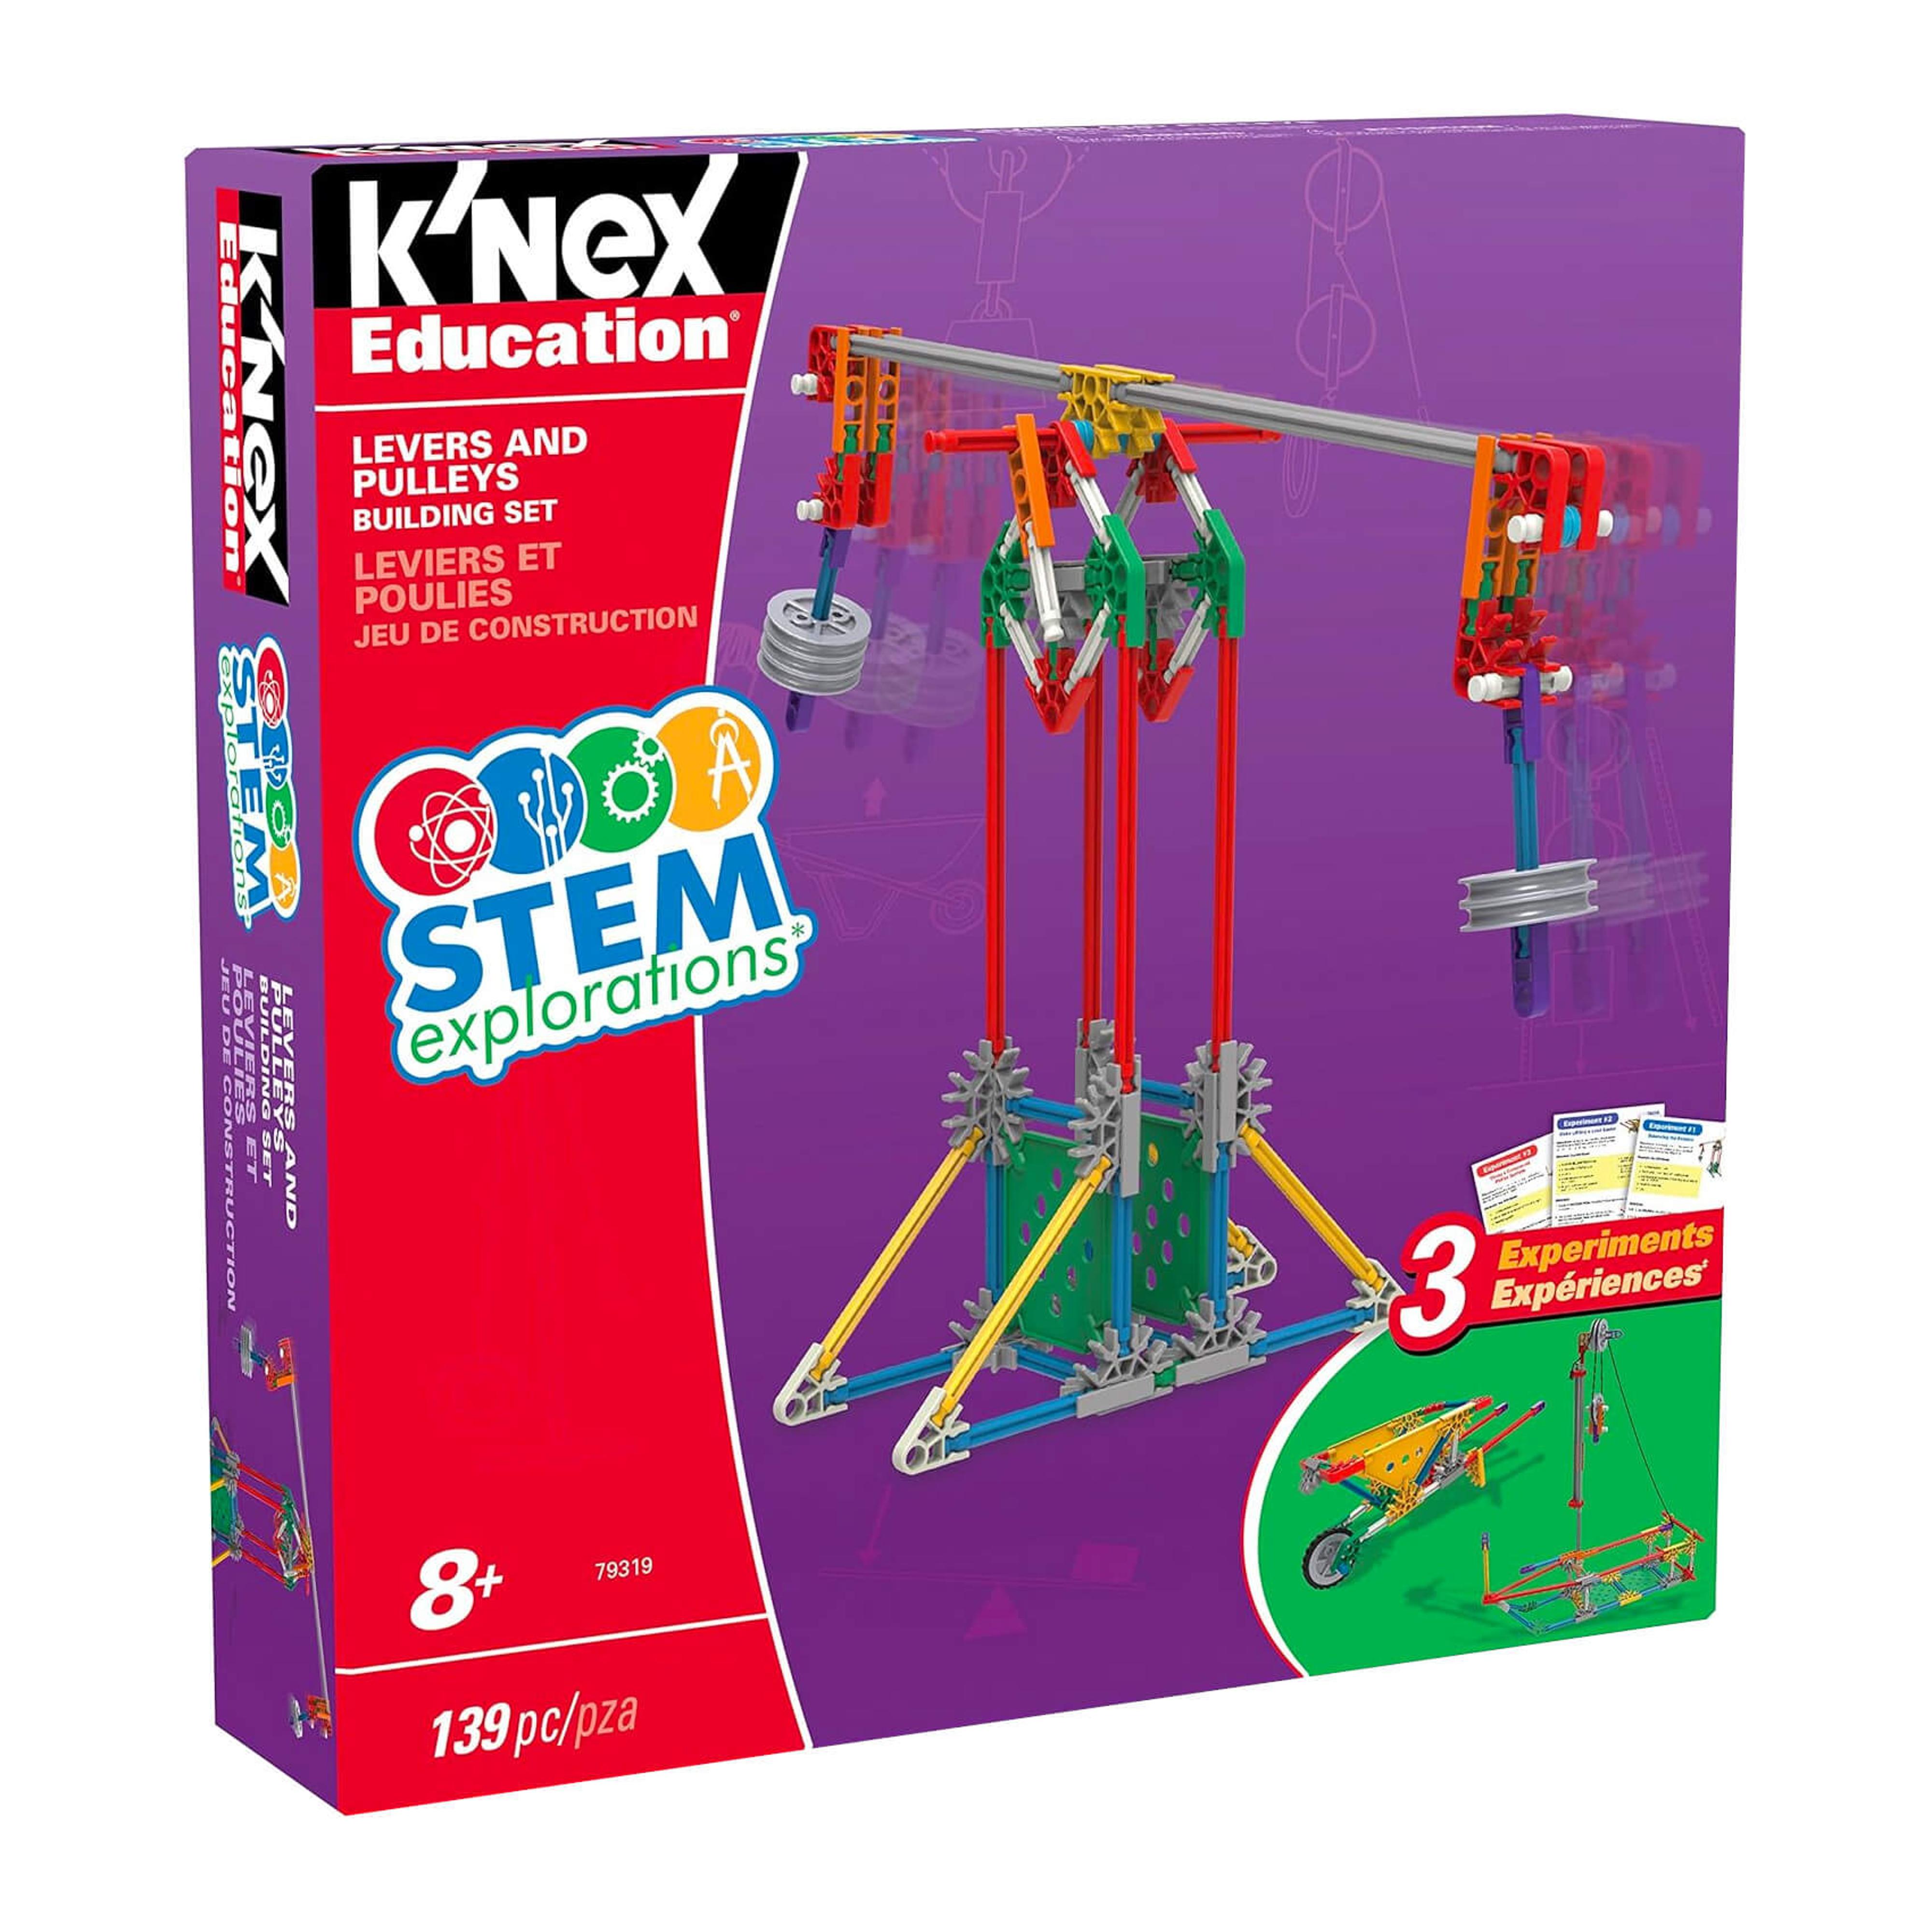 STEAM Explorations - Levers and Pulleys (139 pc)